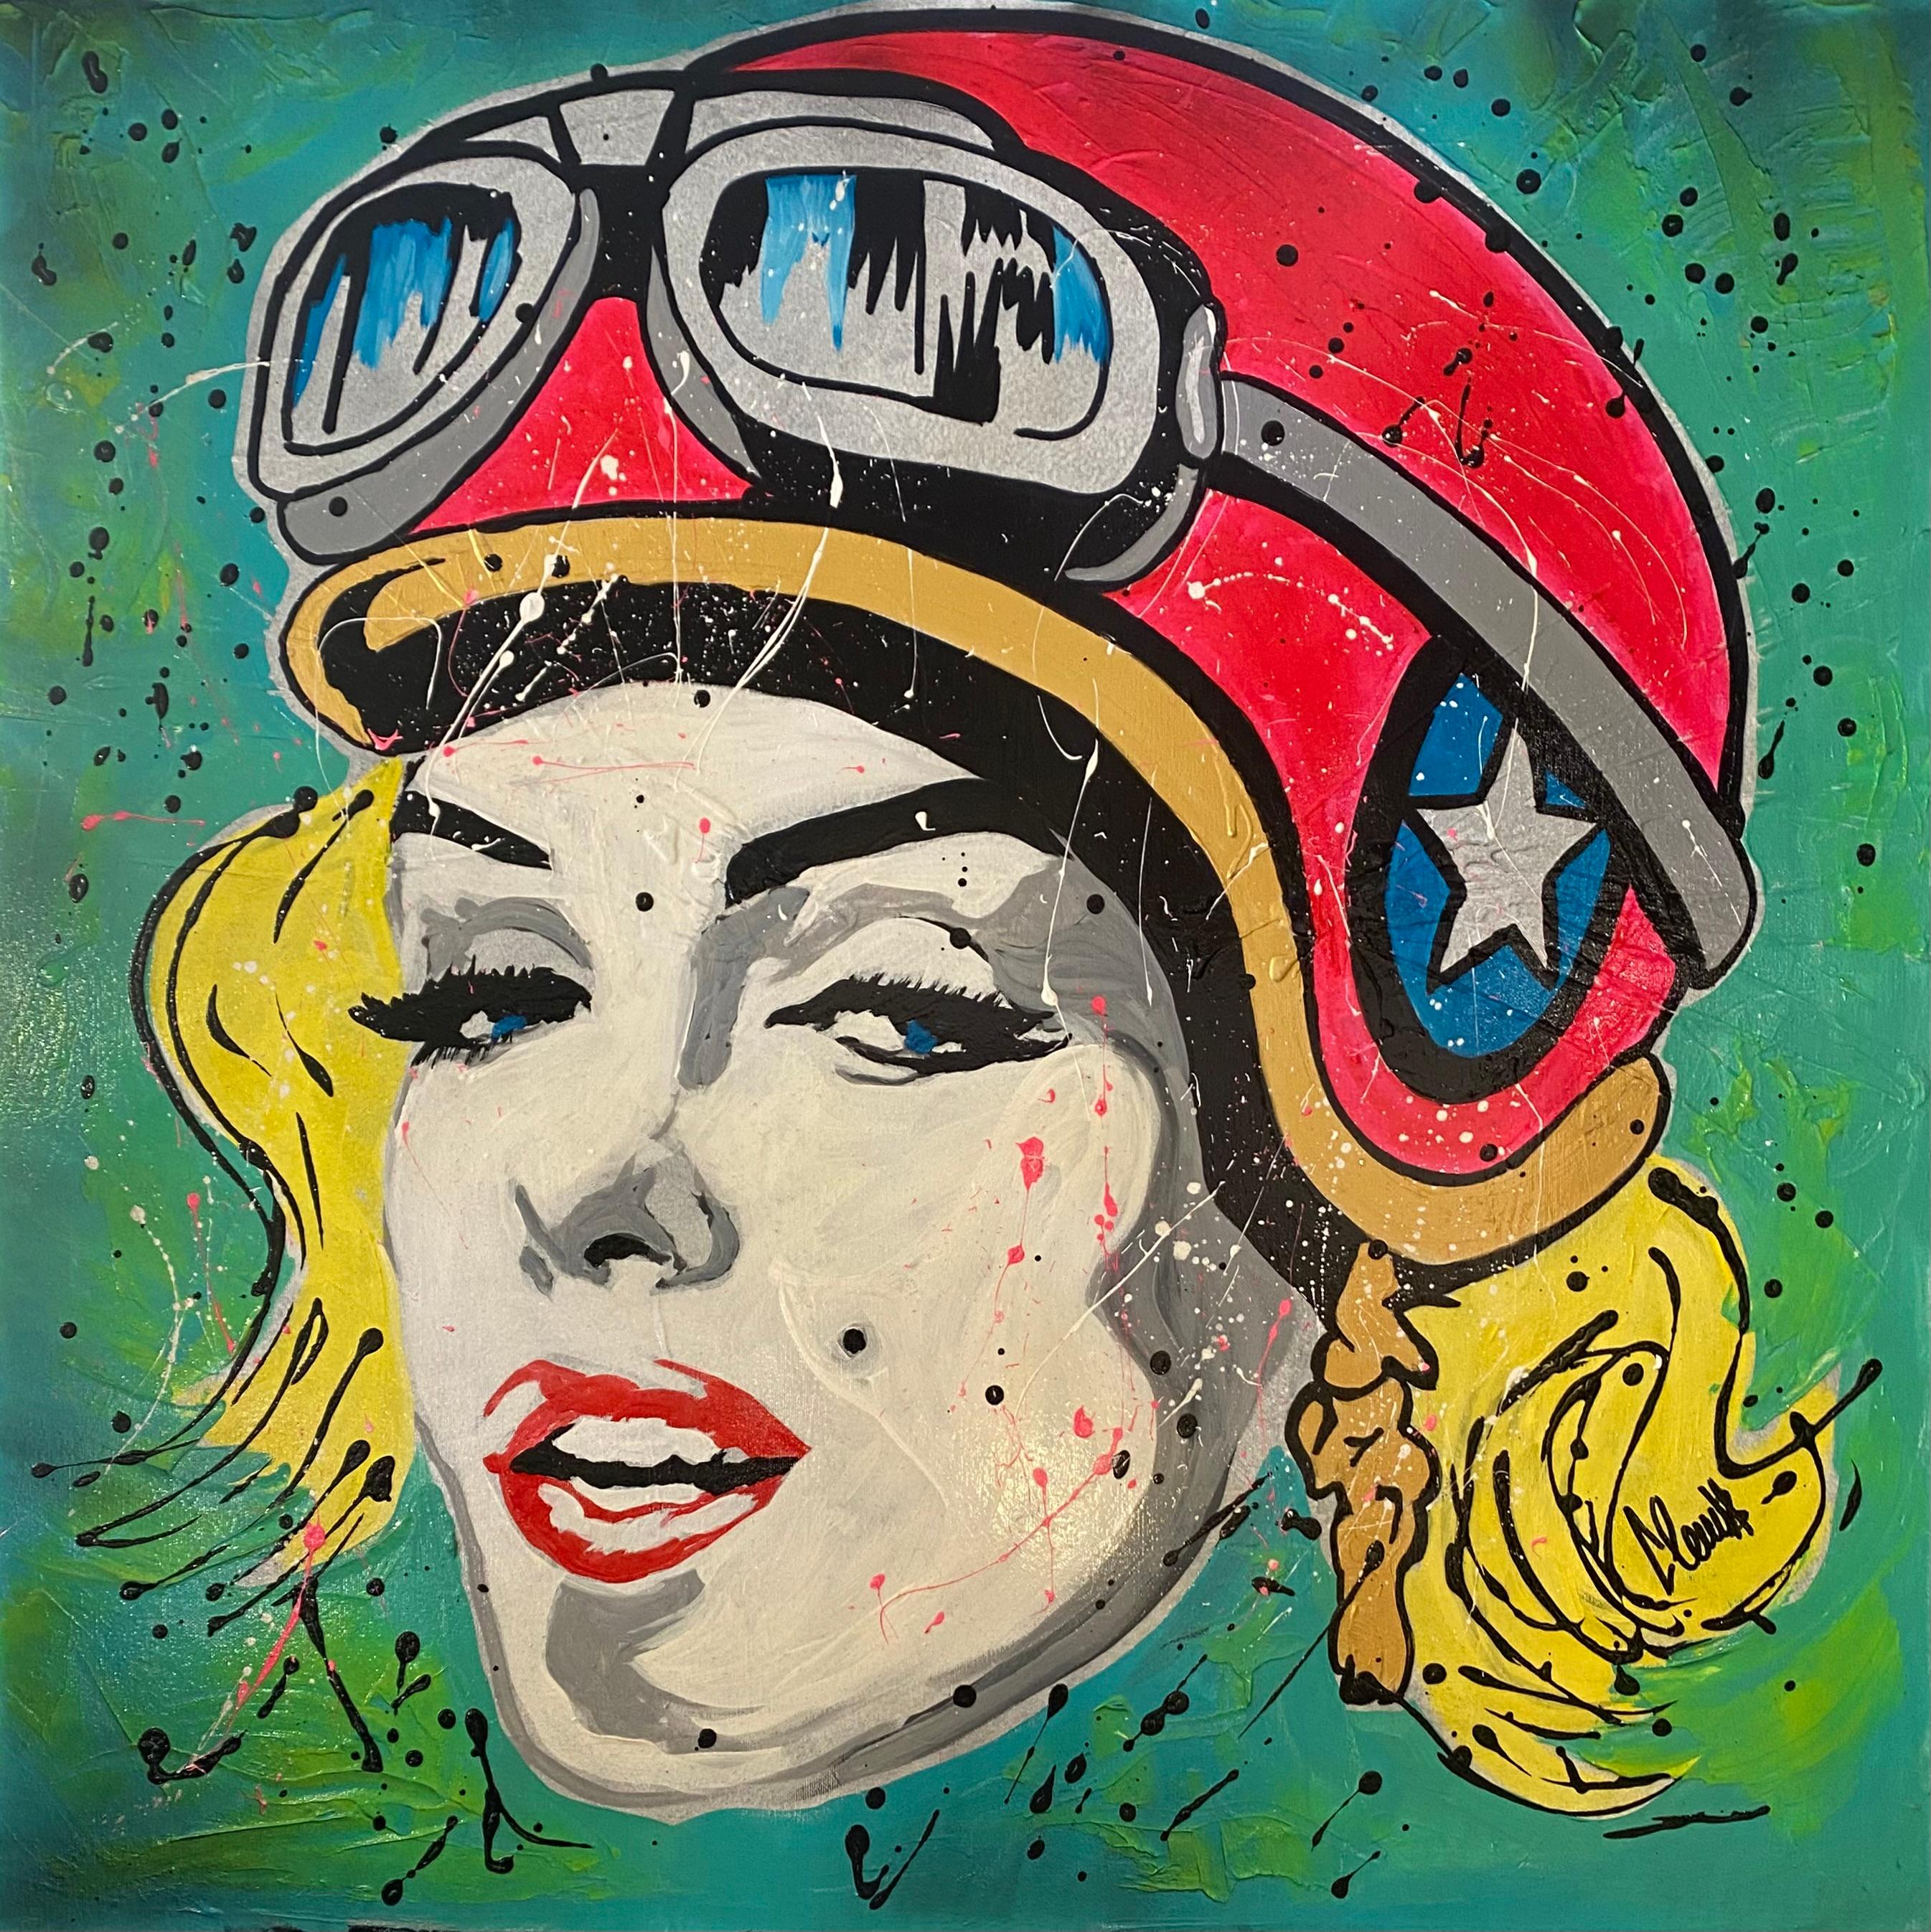 Painting Clem$, Marilyn Monroe Mixed Media on Canvas In Excellent Condition For Sale In Saint ouen, FR